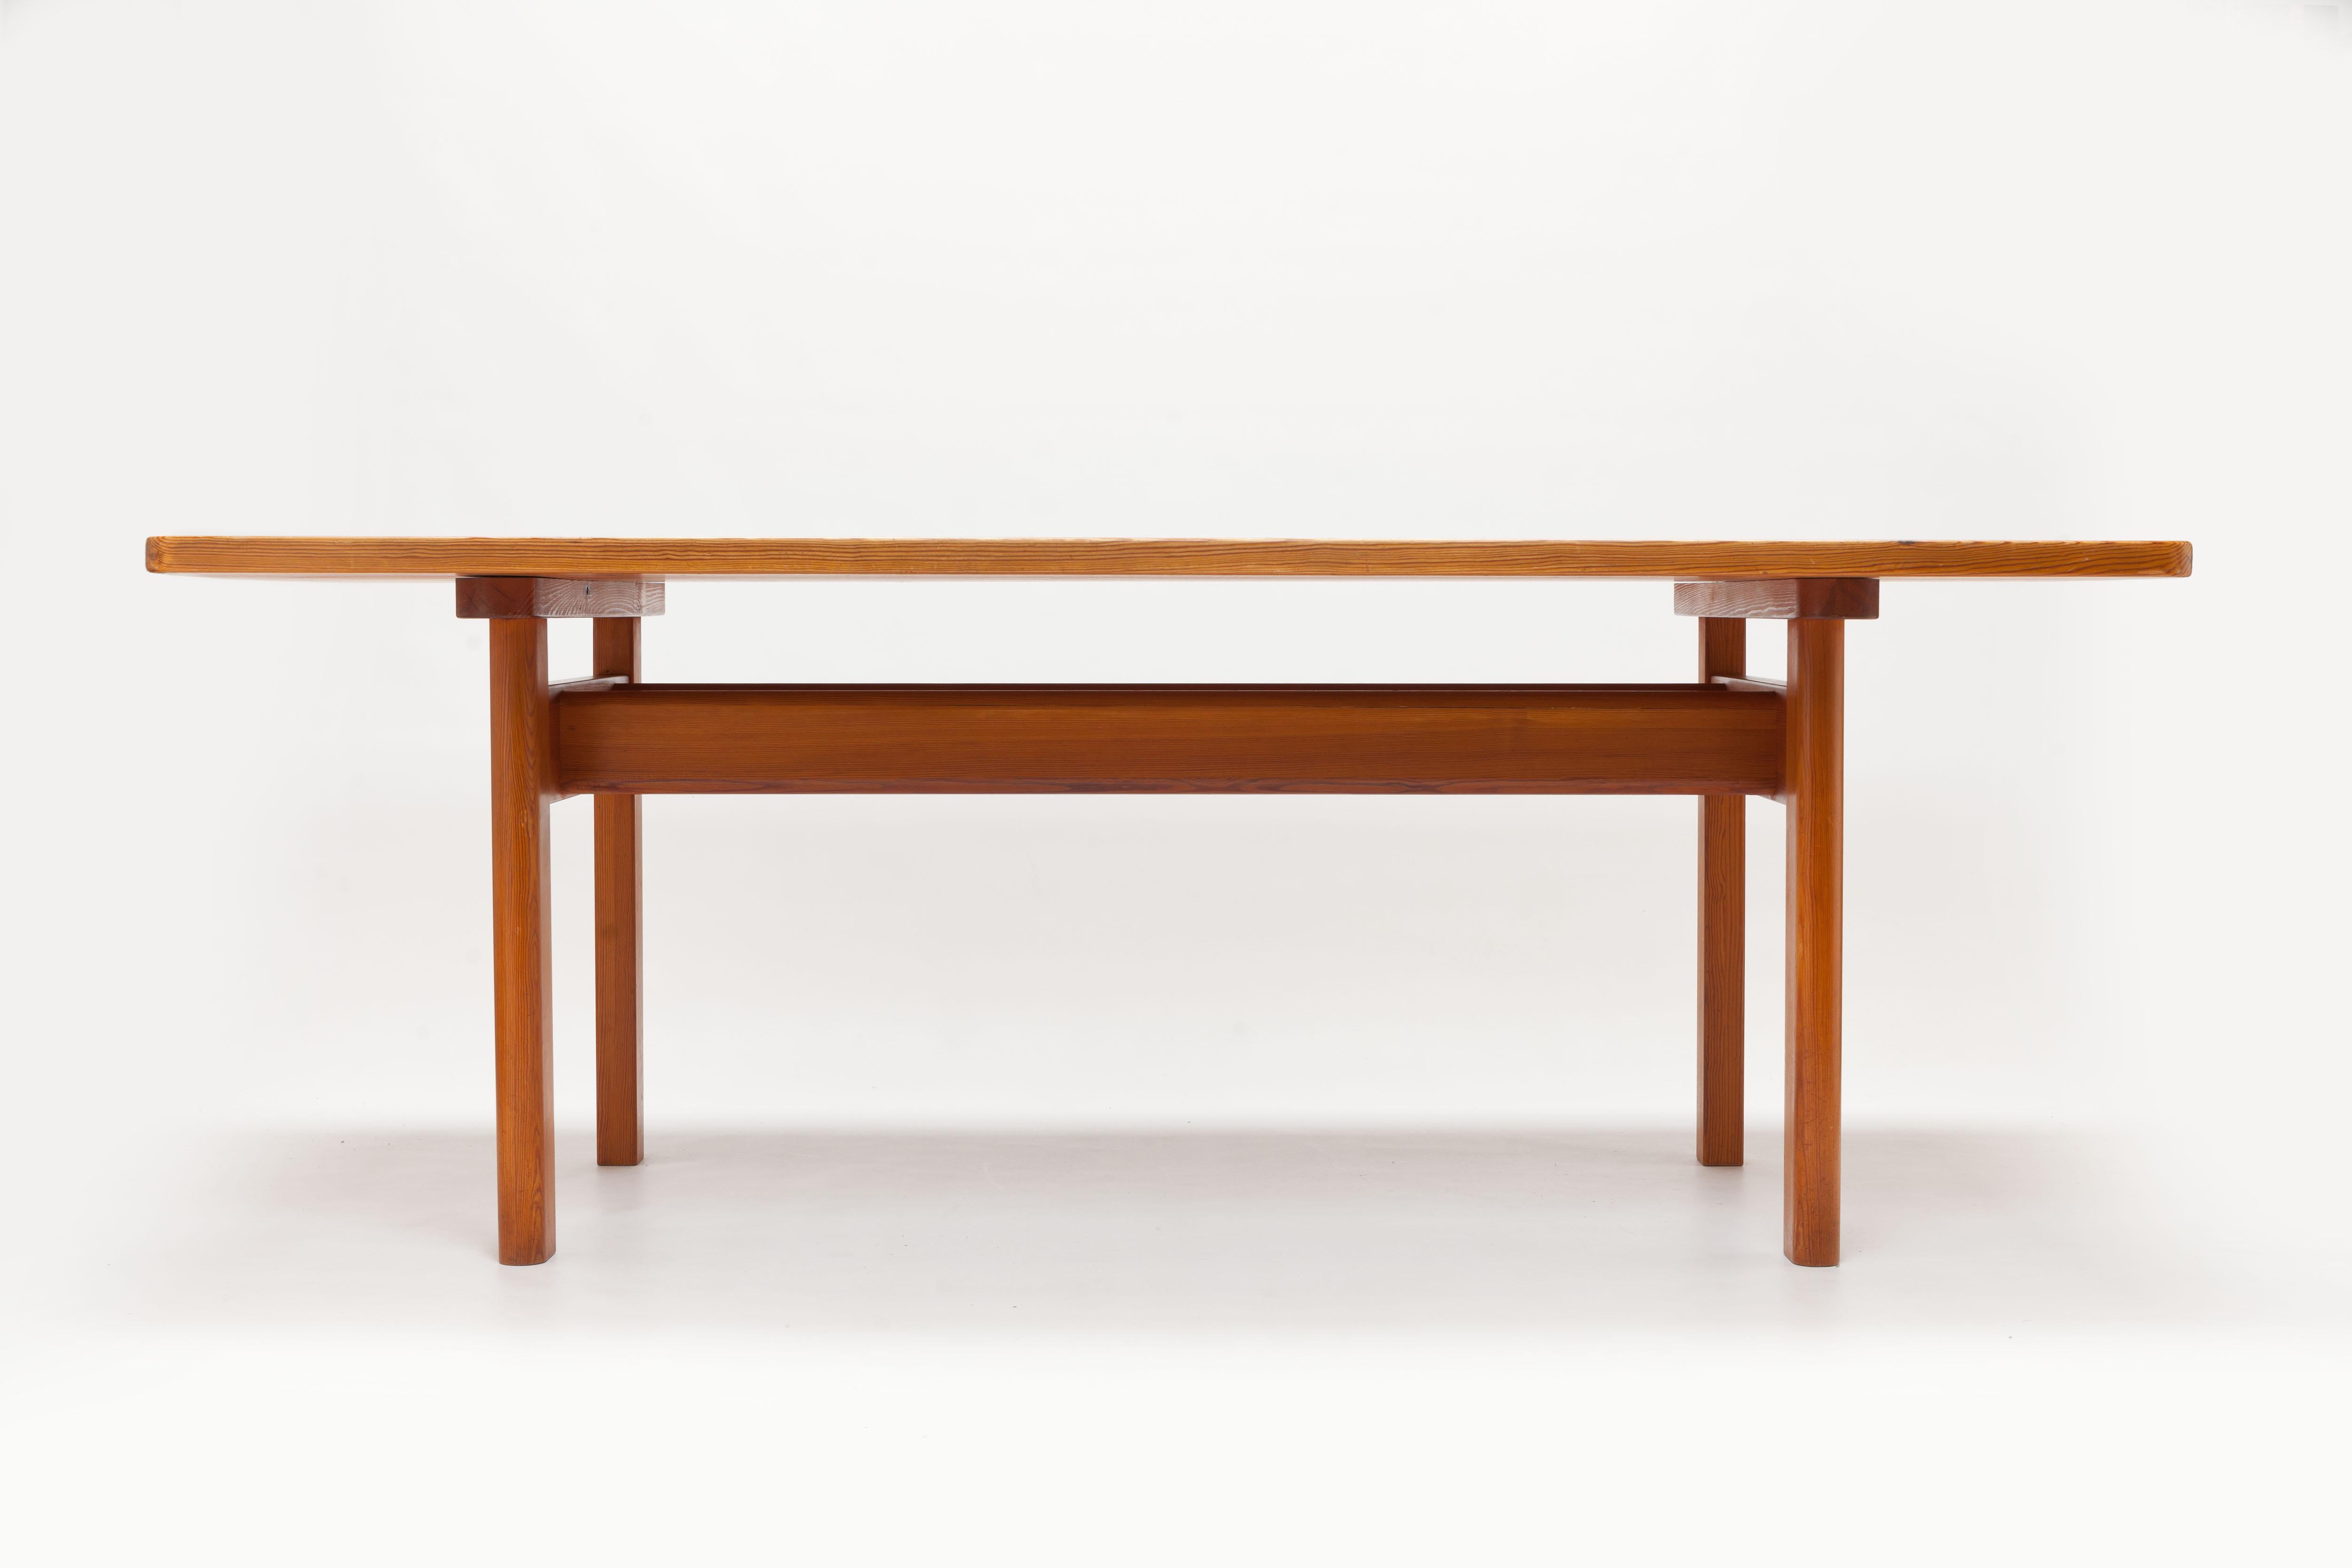 Dining table by Danish designer Børge Mogensen of solid Pine, designed in 1961 for Swedish manufacturer Karl Andersson & Söner.
A beautiful Swedish Modern design with wonderful metal bolts and great detailing.  Truly quality piece, executed from